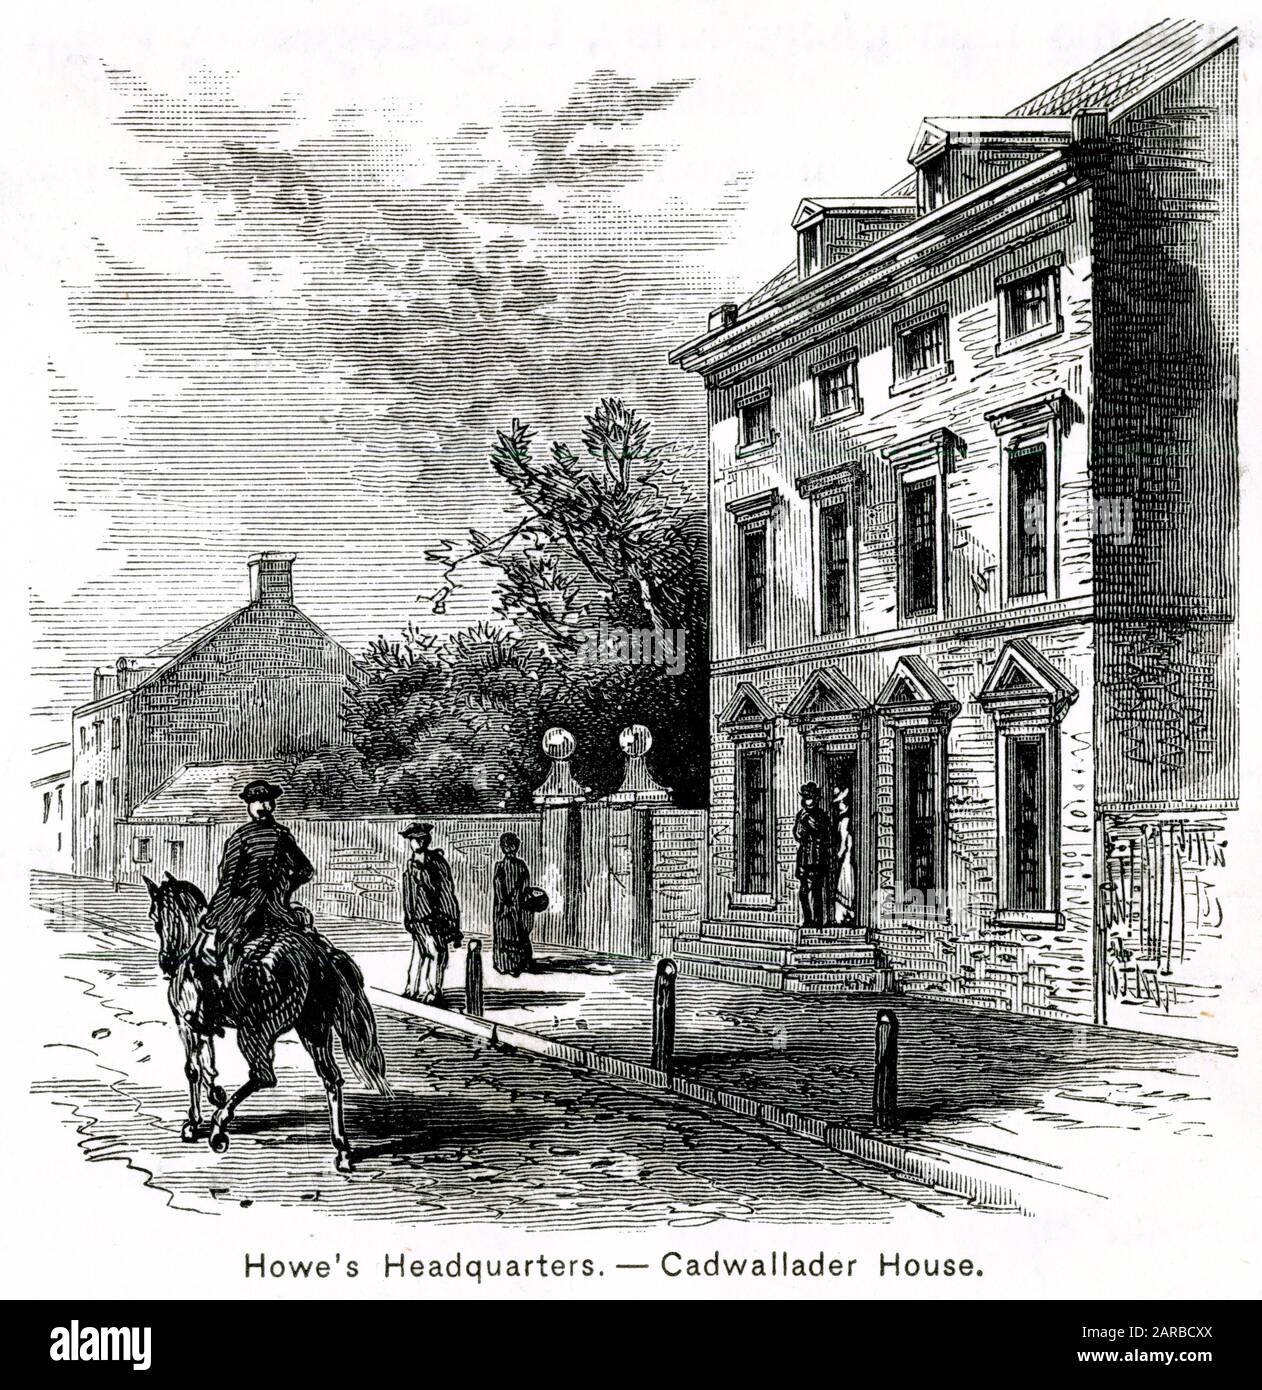 Cadwallader House -  General William Howe's Headquarters In Philadelphia during The American War of Independence     Date: 1776 Stock Photo